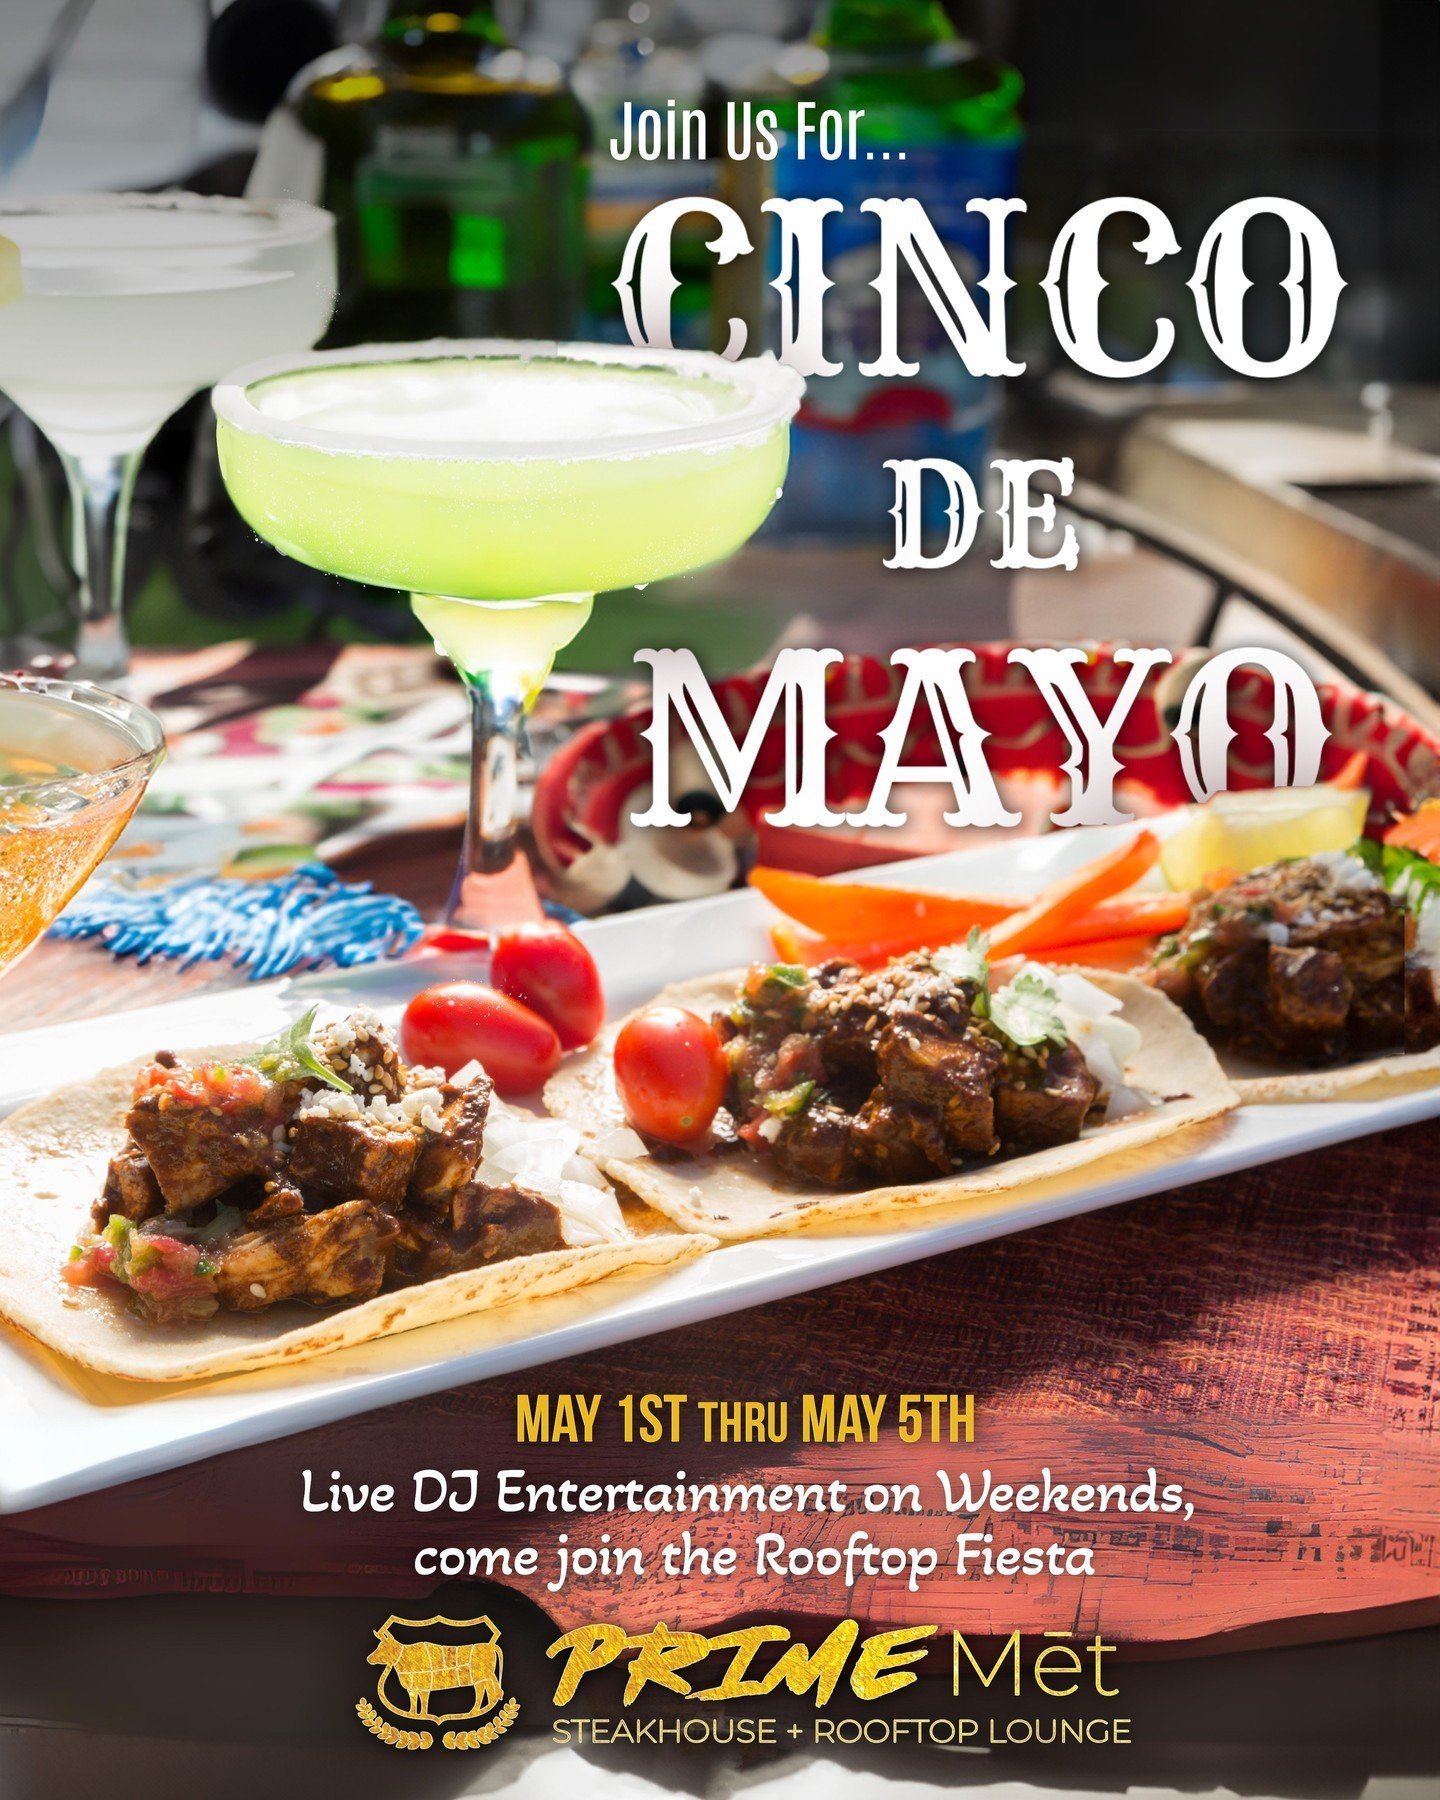 &iexcl;Viva la Fiesta! Celebrate Cinco de Mayo all week long at PRIME Mēt Steakhouse! 🇲🇽🥳 Indulge in delicious steak tacos and margaritas from May 1st to May 5th. 🍸🌮

Get ready to groove with live DJ entertainment on the weekends. Don't miss out